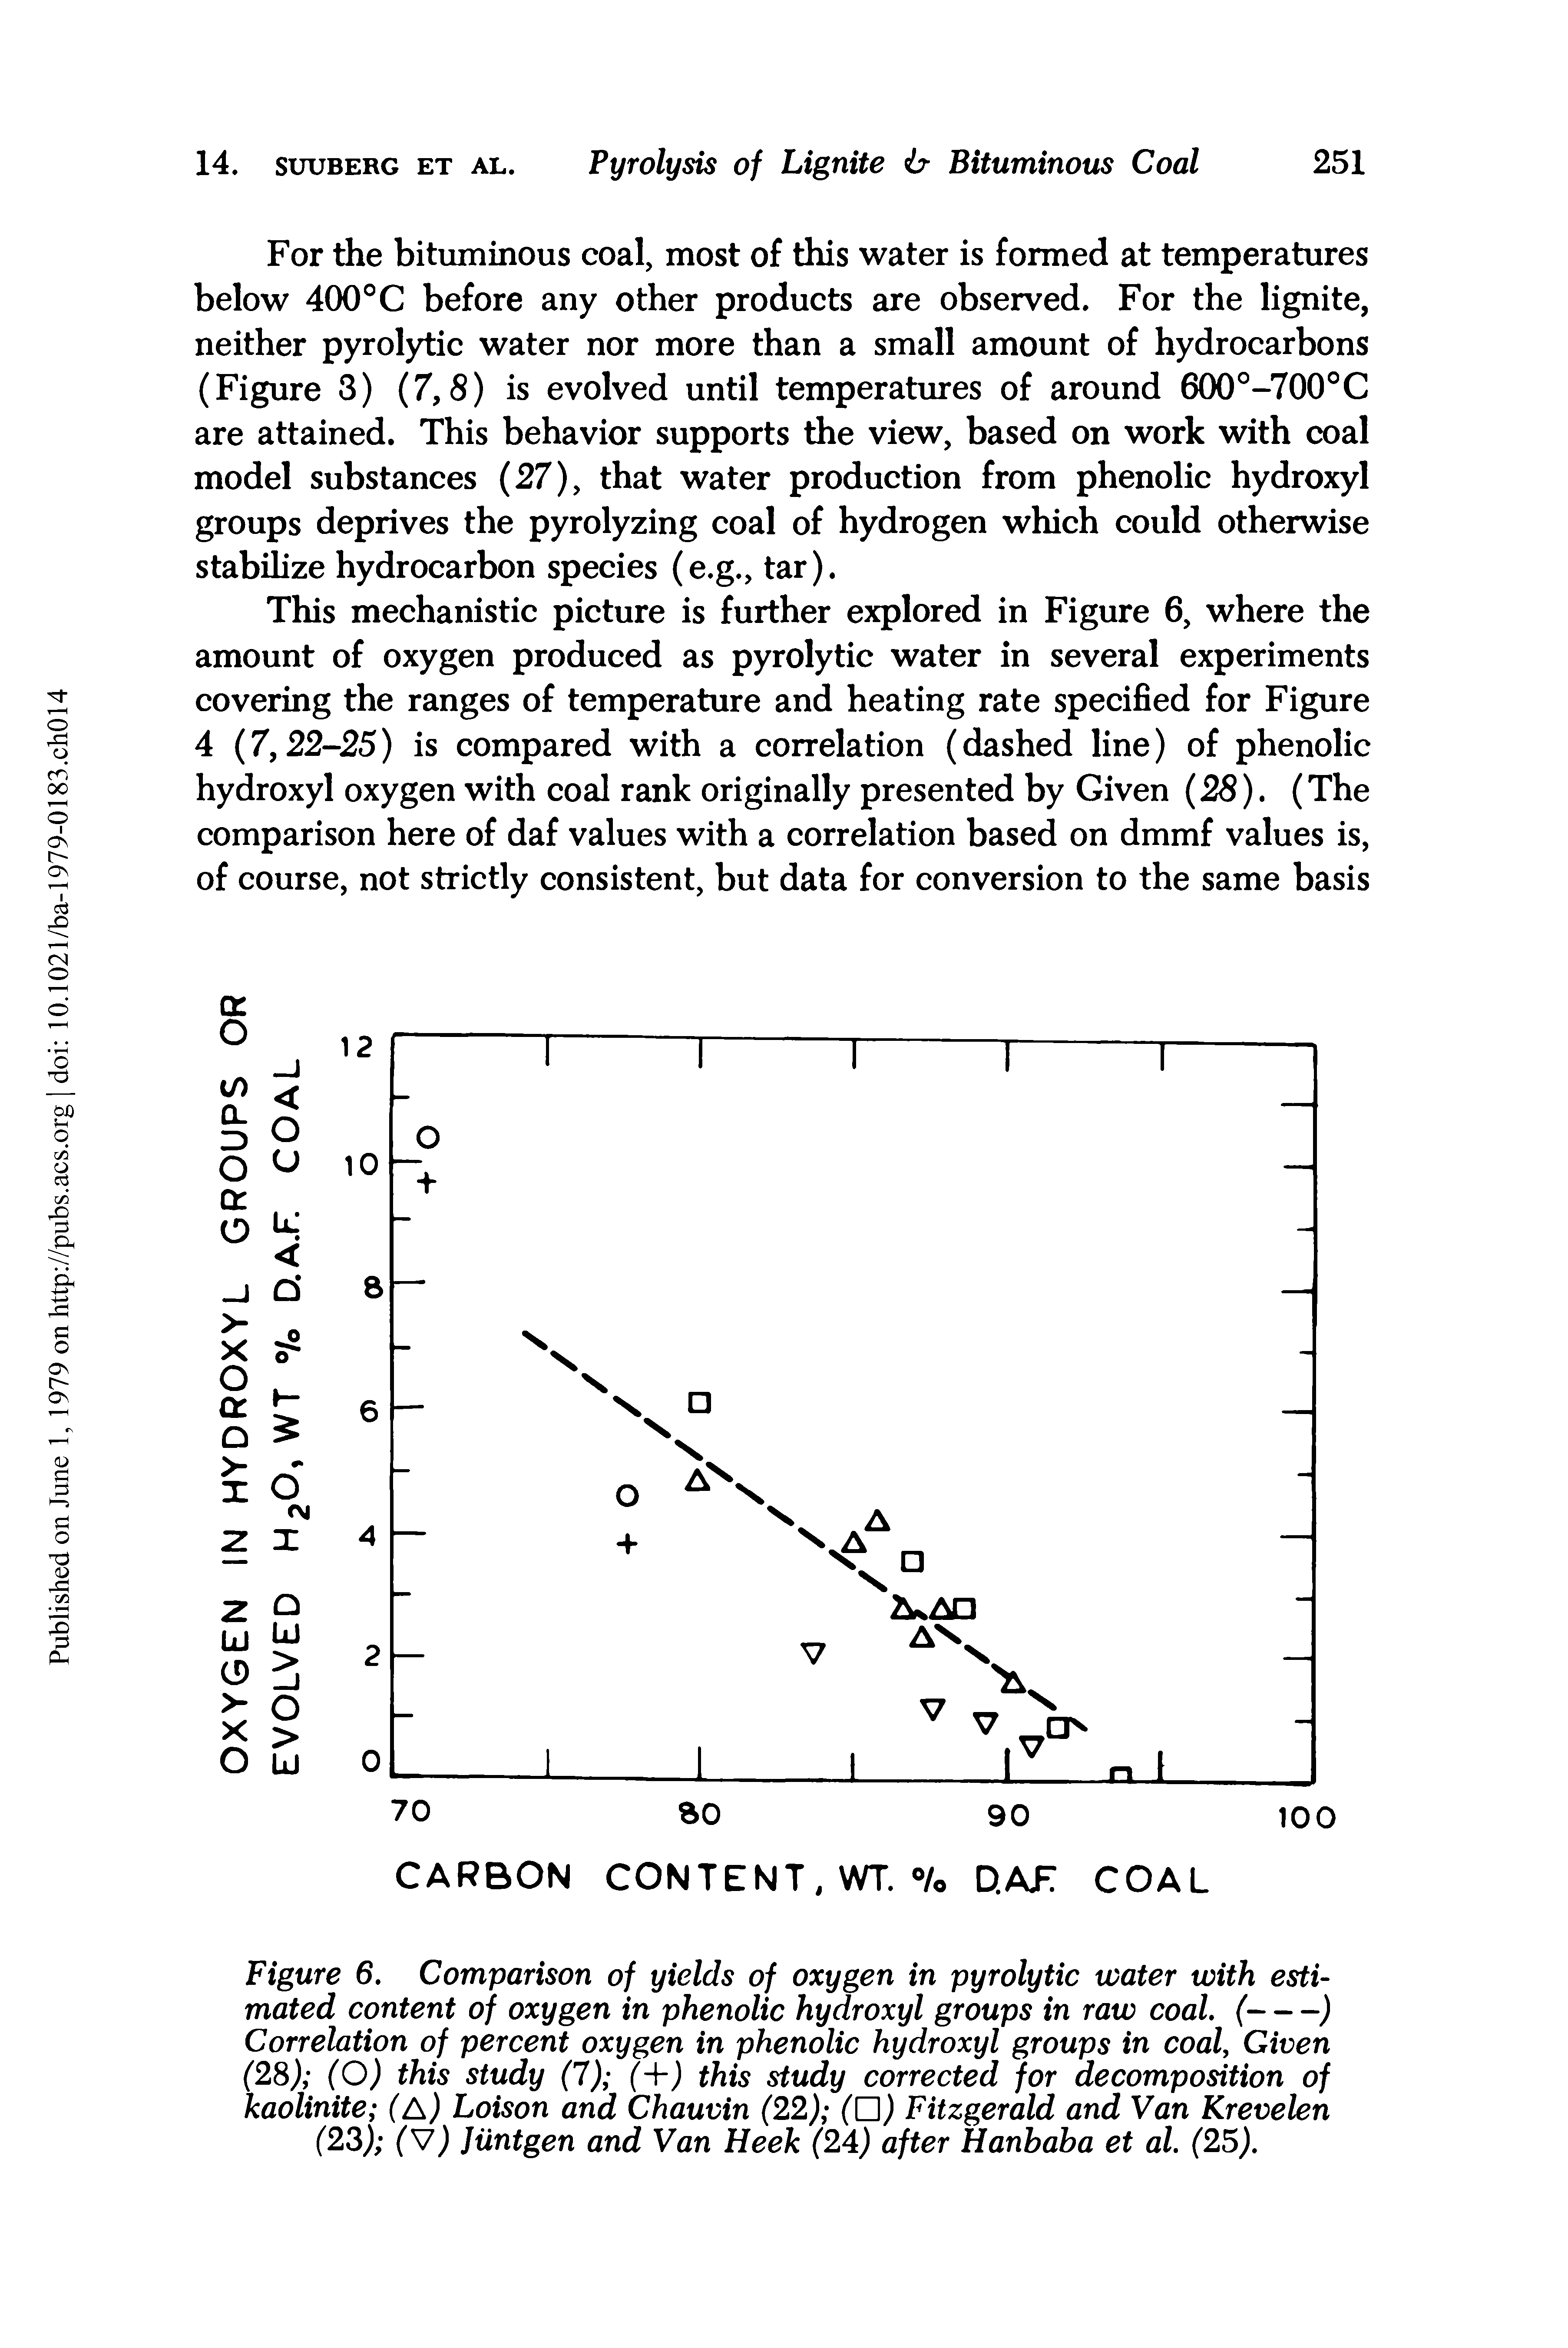 Figure 6. Comparison of yields of oxygen in pyrolytic water with estimated content of oxygen in phenolic hydroxyl groups in raw coal. (-)...